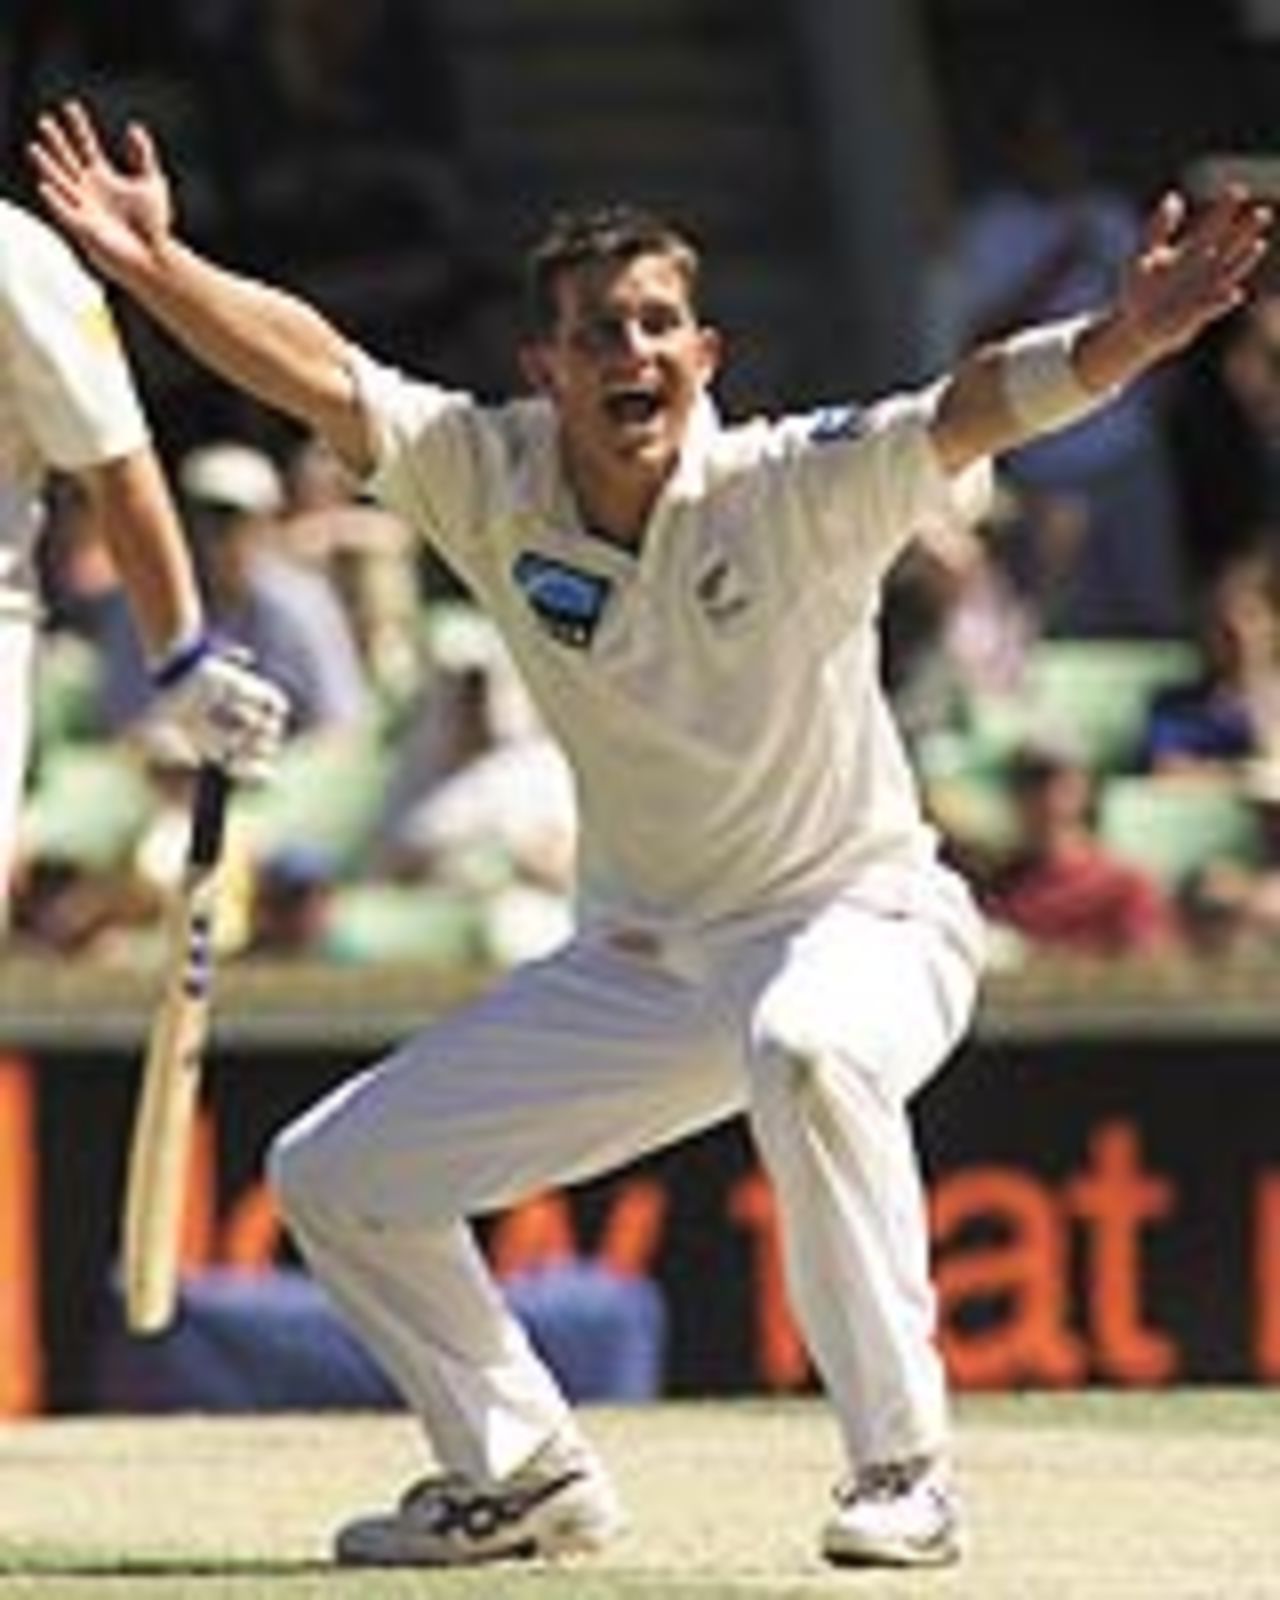 Shane Bond of New Zealand unsuccessfully appeals for LBW against Shane Warne of Australia, during day three of the Third Test between Australia and New Zealand, played at The WACA, Perth, Australia.